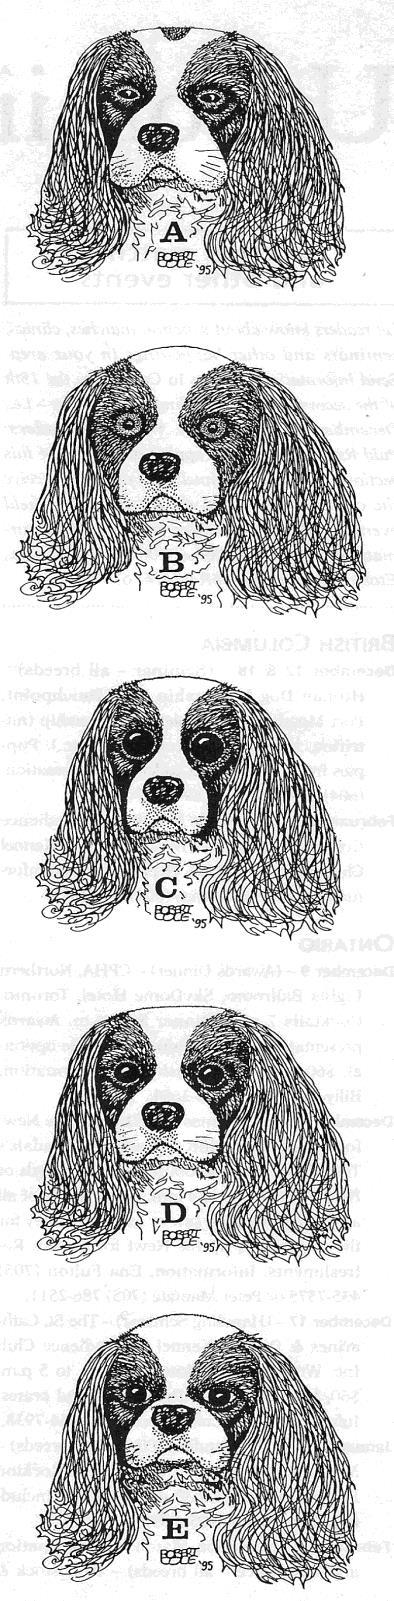 YOU BE THE JUDGE By Robert Cole From Dogs in Canada, December 1995 THE CAVALIER KING CHARLES SPANIEL FIVE HEADS Decide which one of these five Cavalier King Charles Spaniel heads best represents